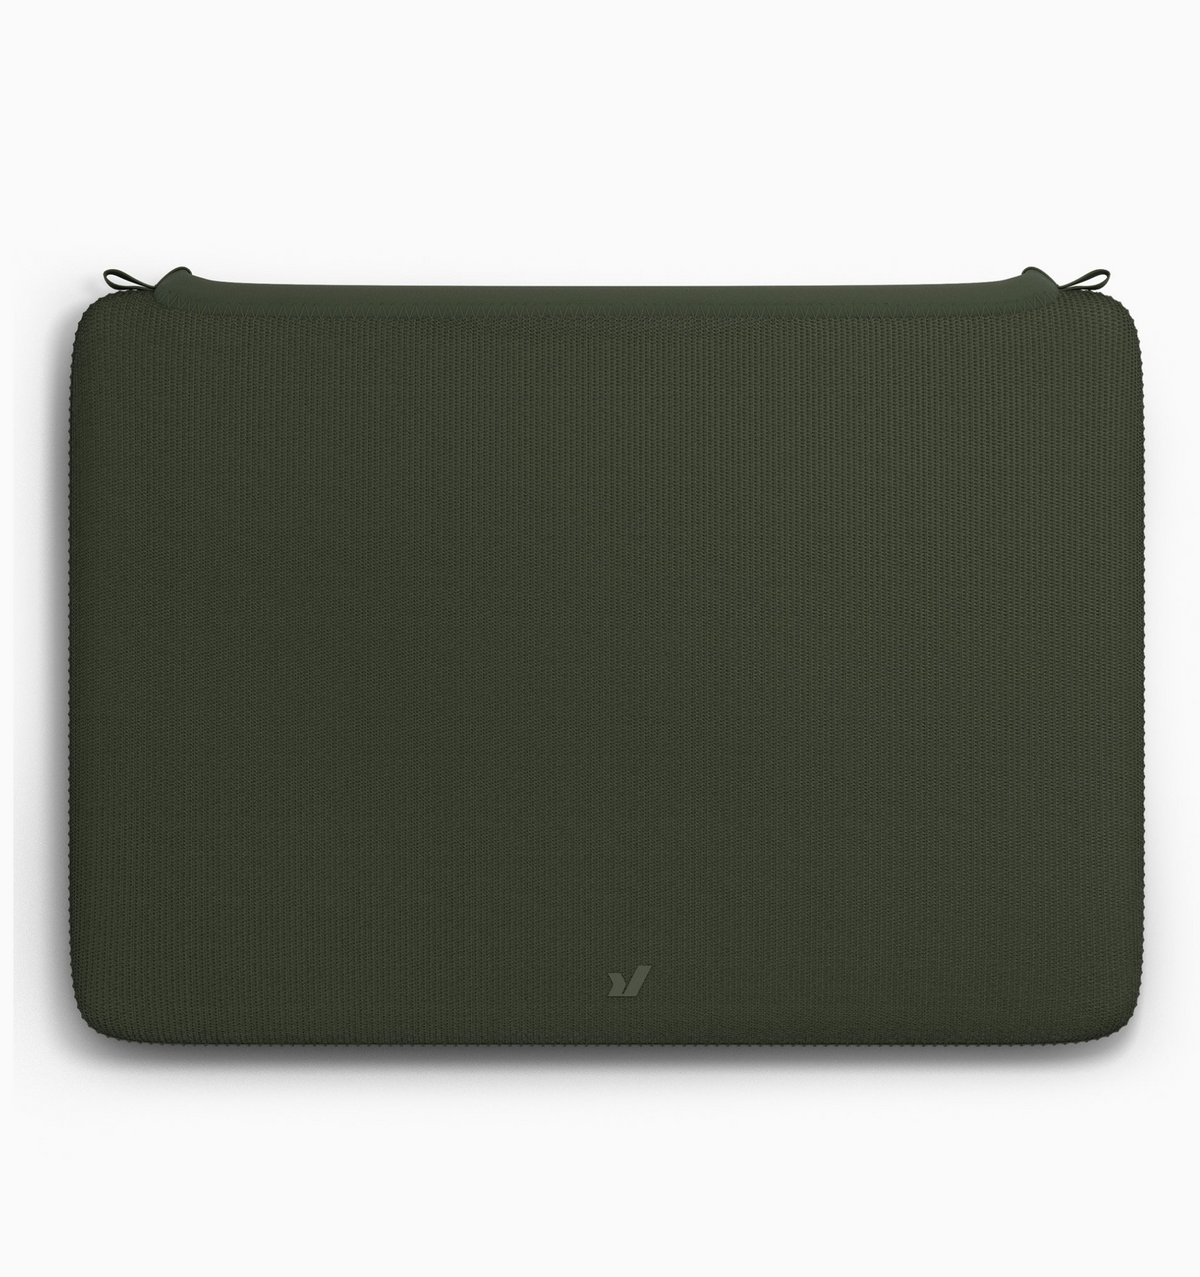 Rushfaster Laptop Sleeve For 13" MacBook Air/Pro - Green